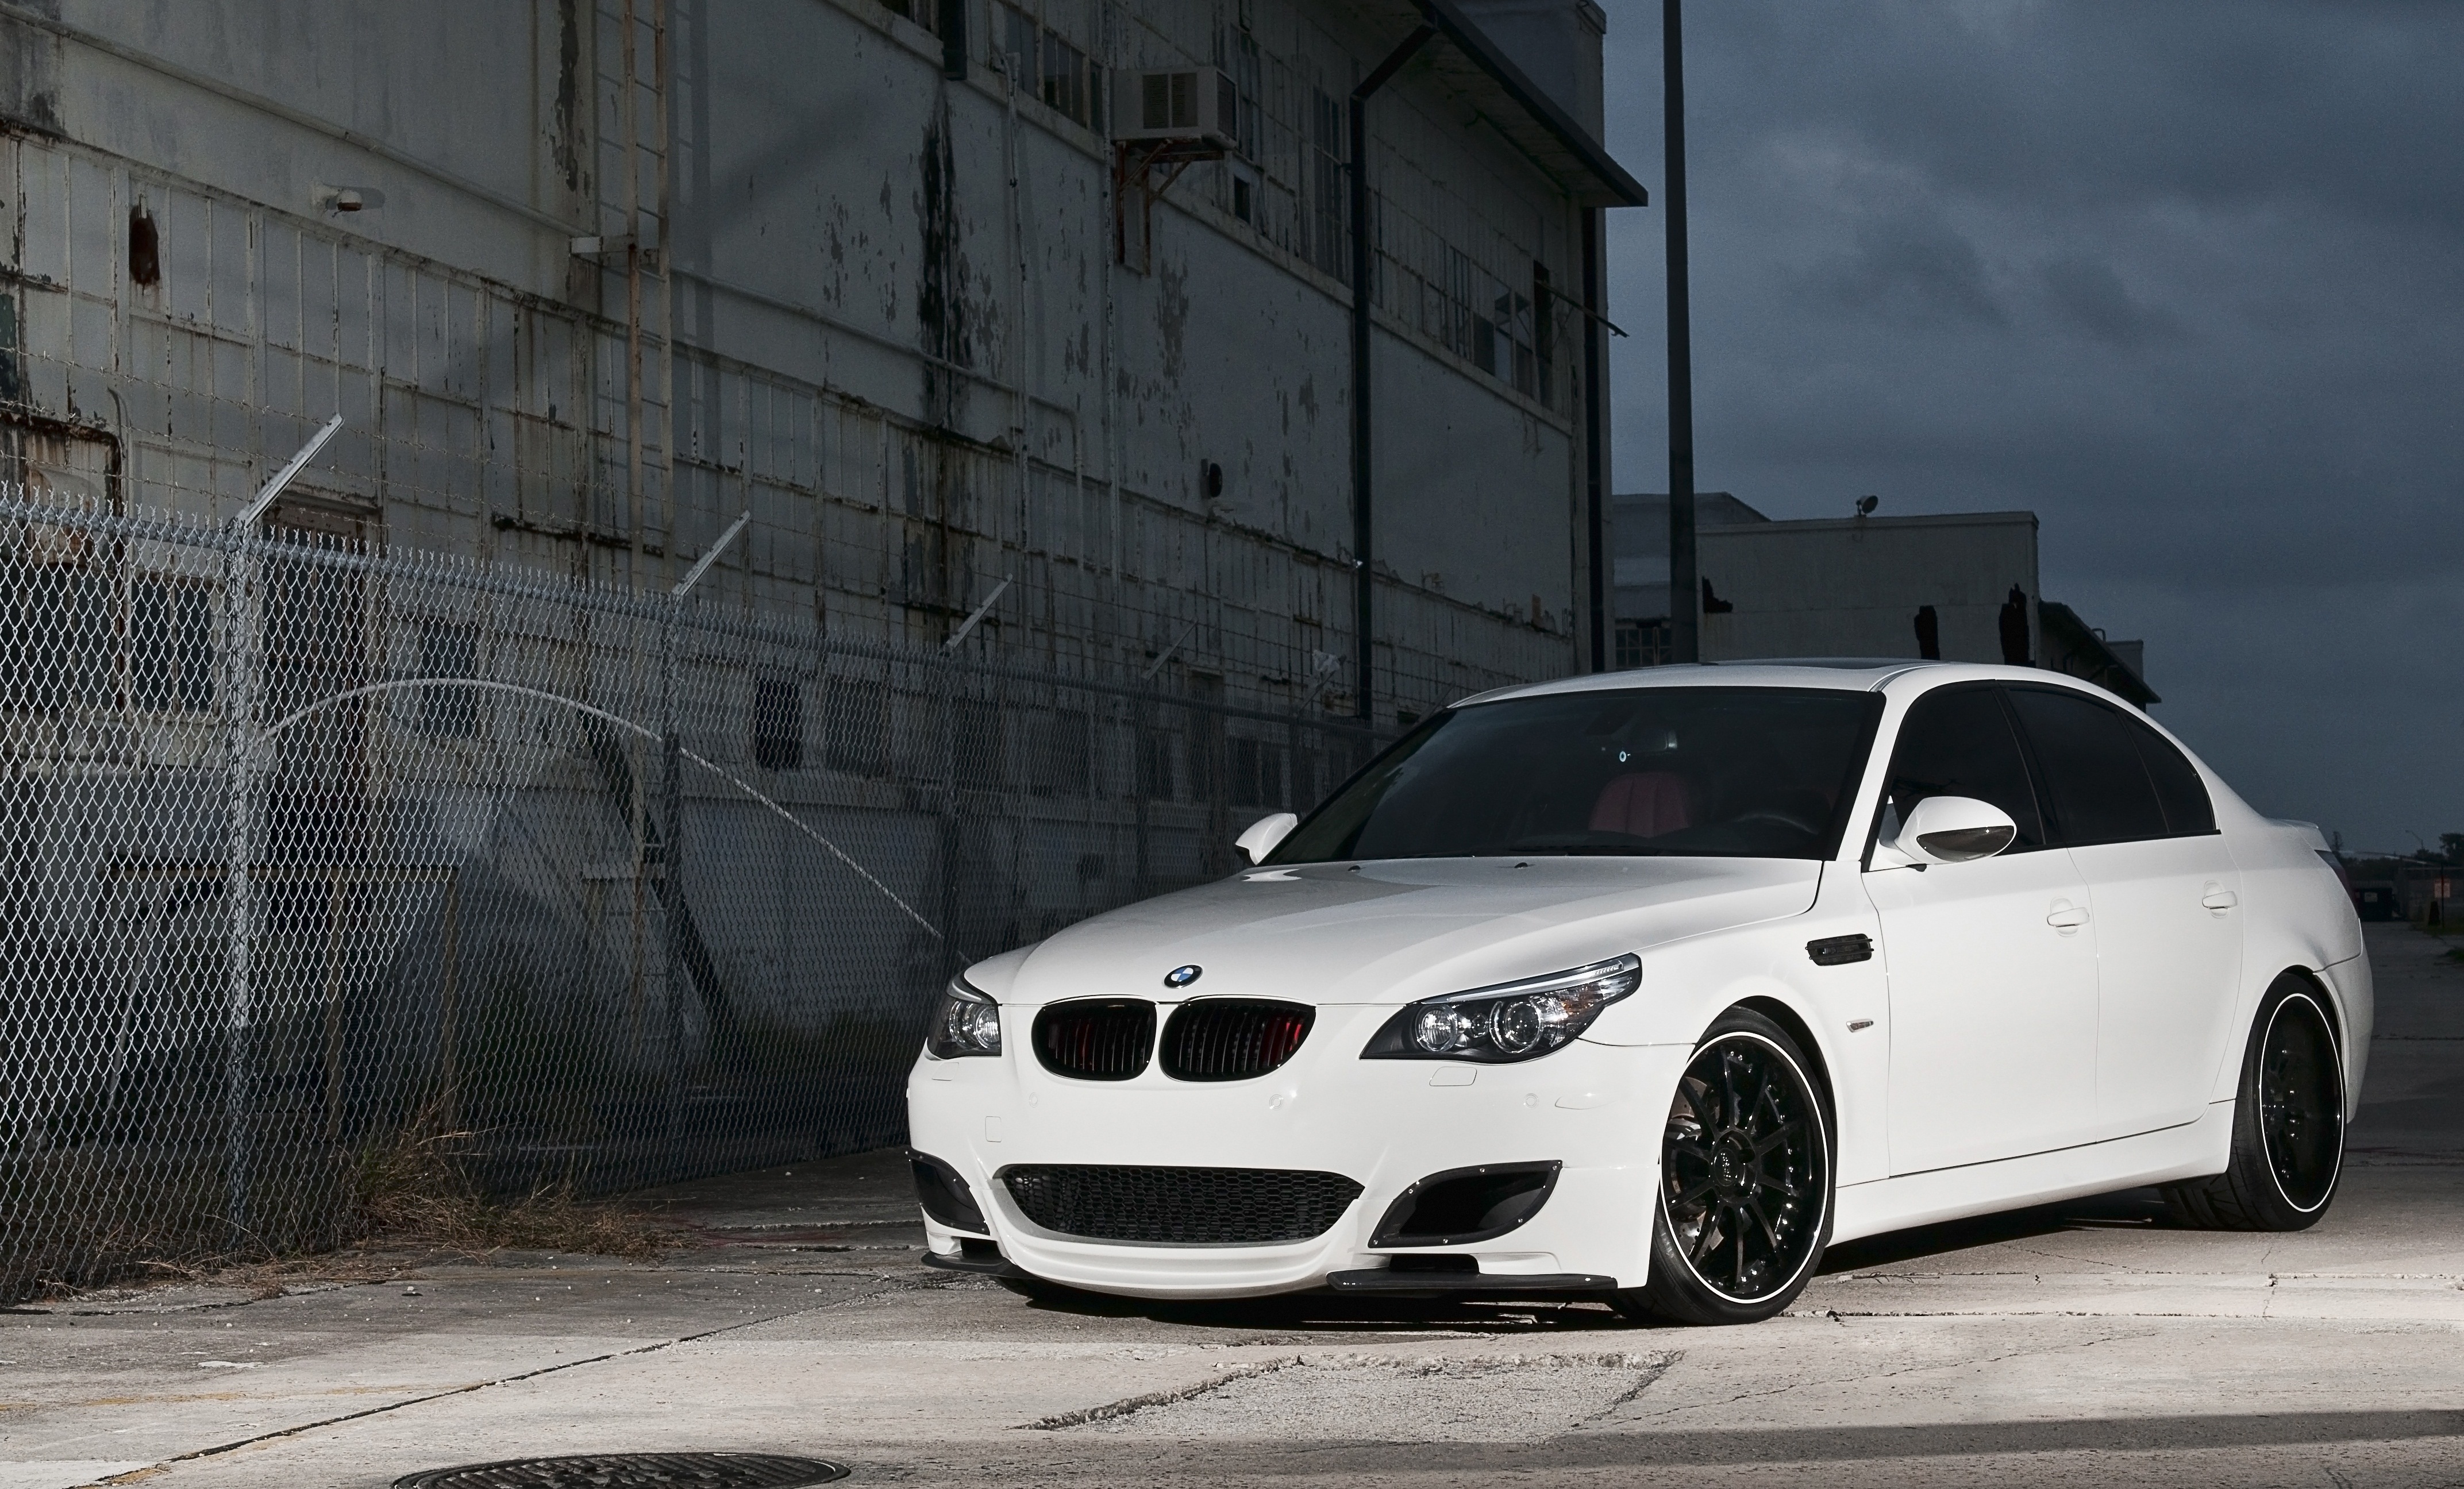 Bmw E60 wallpapers, Vehicles, HQ Bmw E60 pictures | 4K Wallpapers 2019